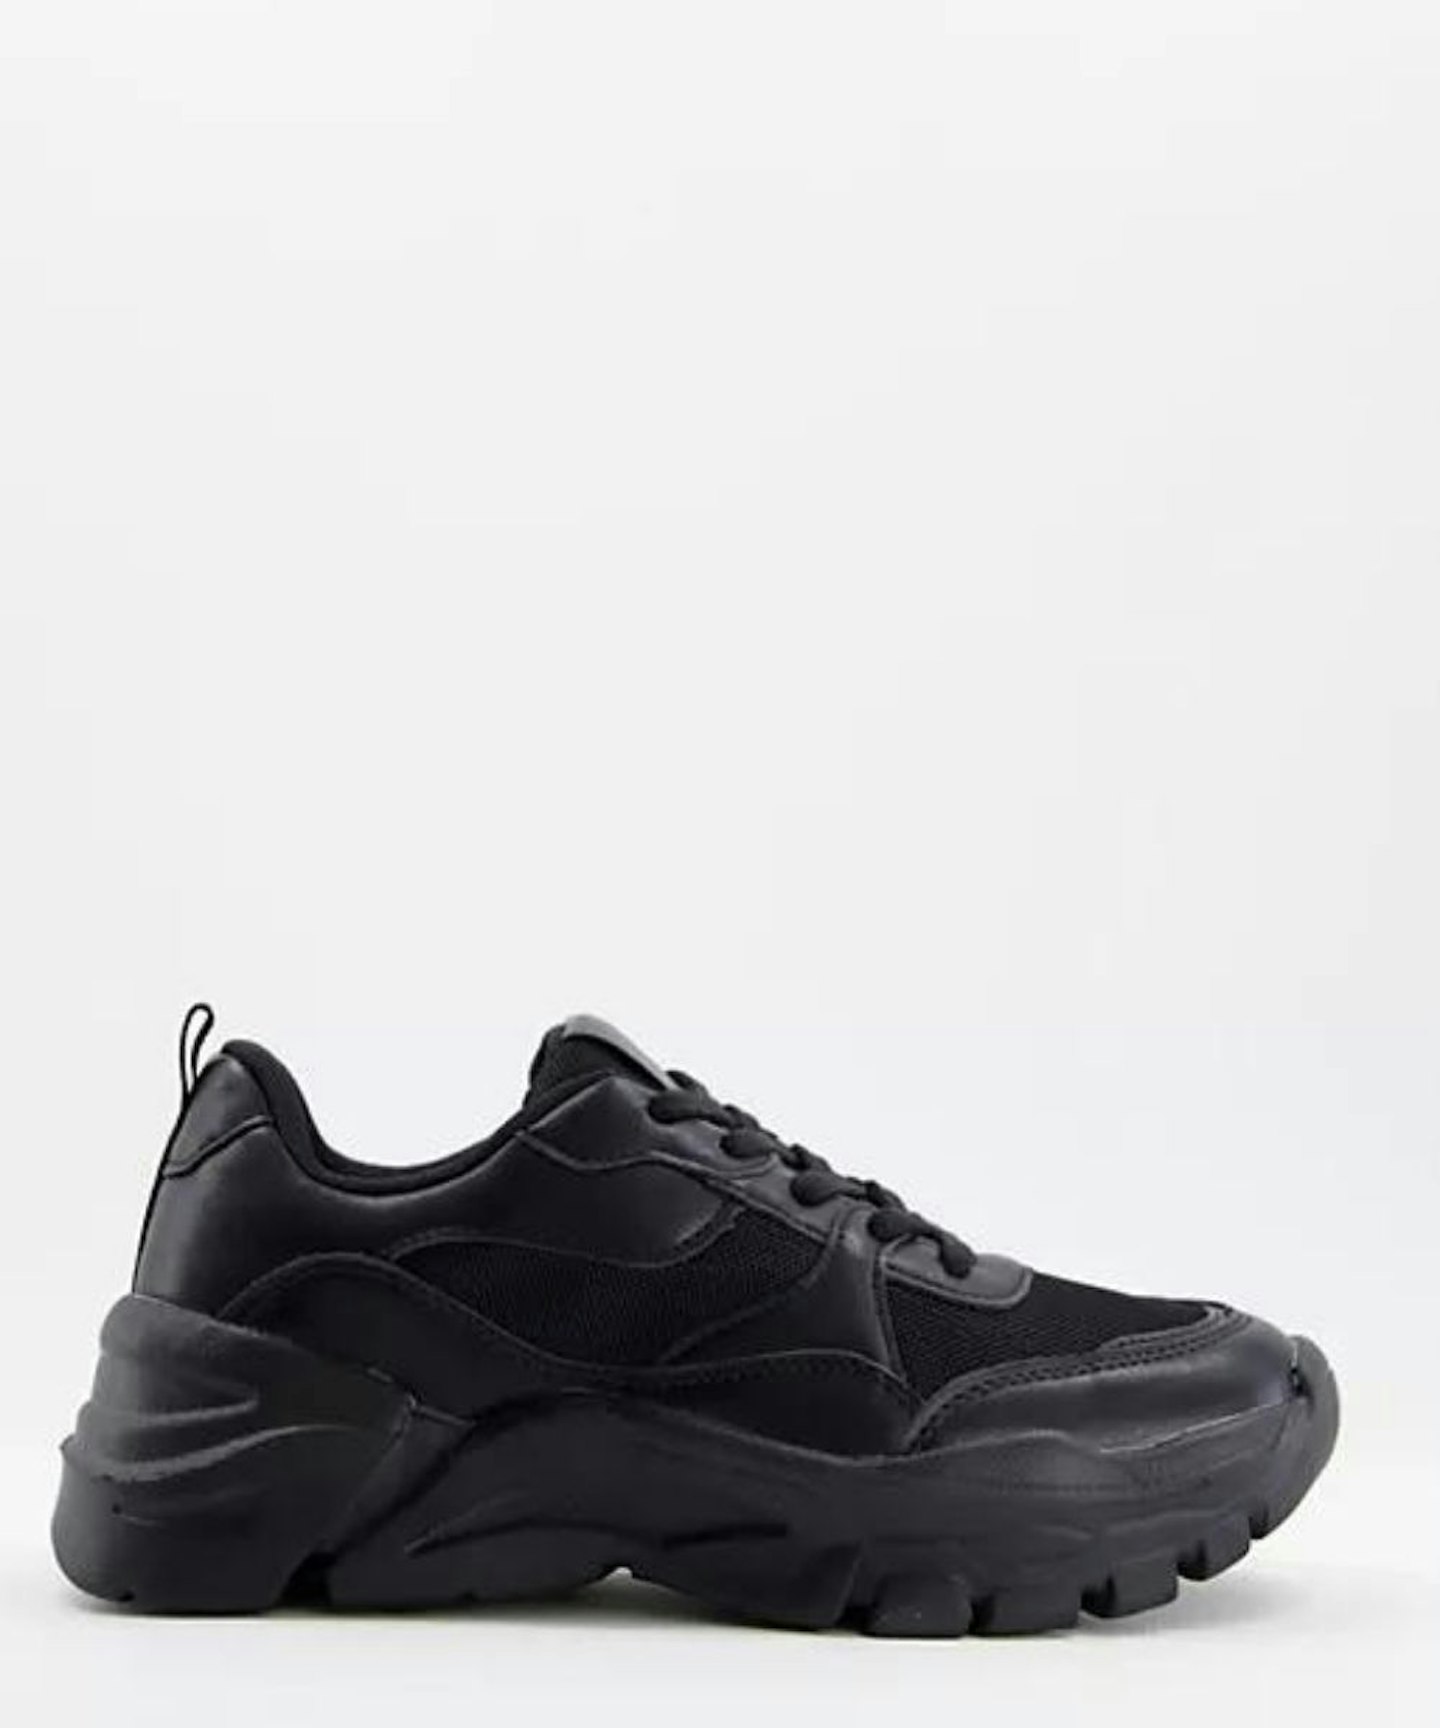 Schuh Black Trainers